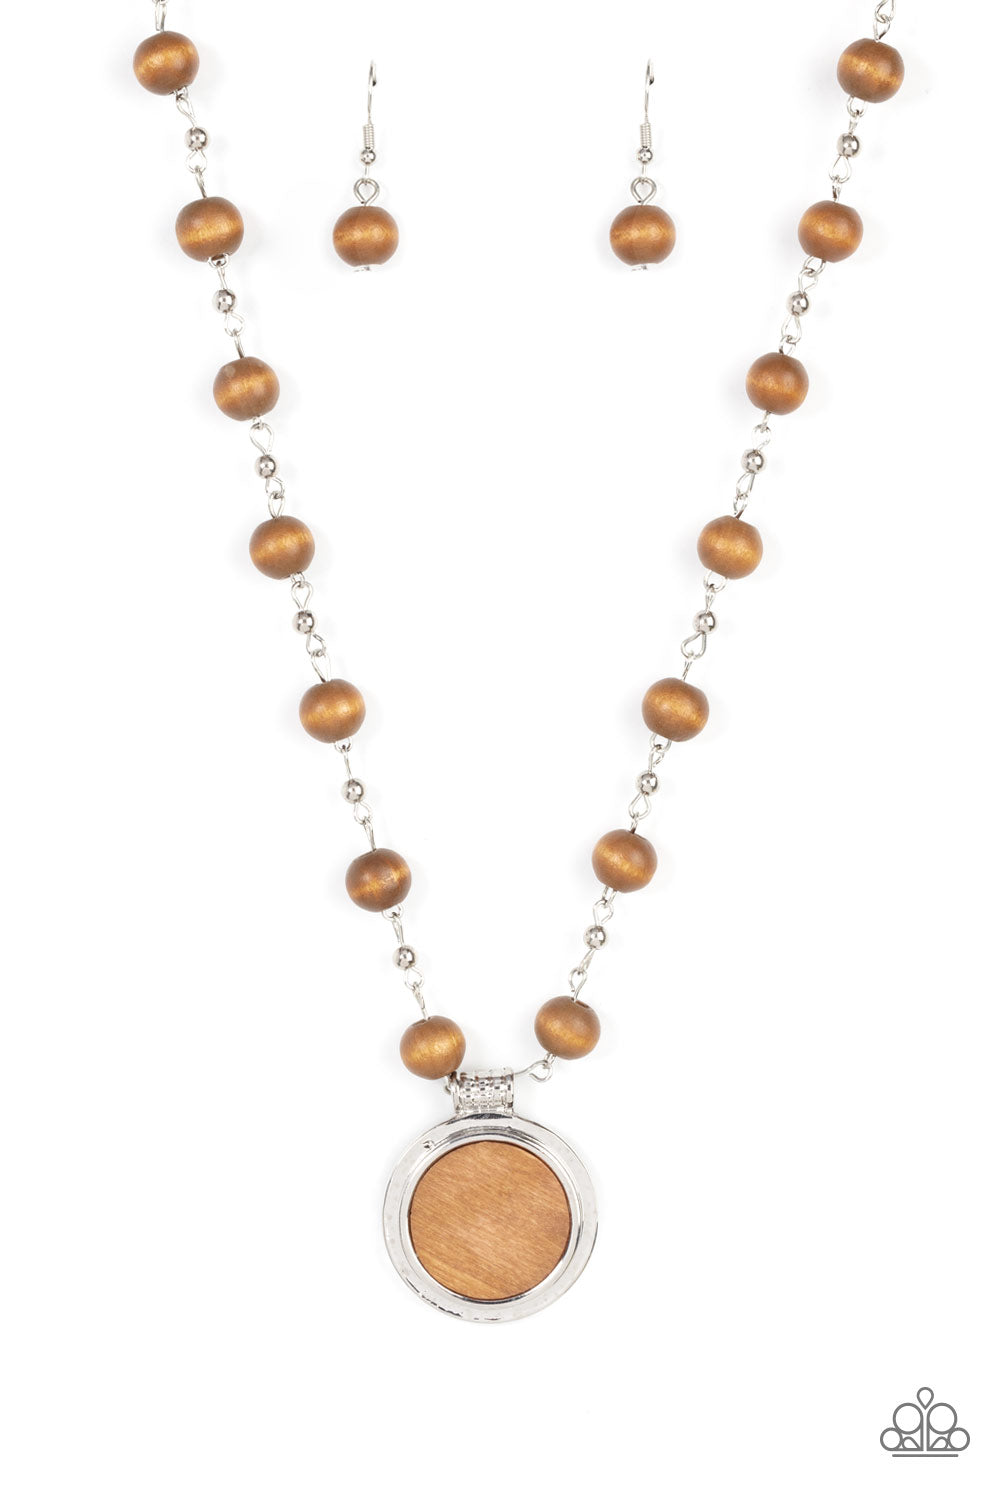 Soulful Sunrise Brown Necklace - Paparazzi Accessories  Infused with dainty silver chains, a collection of brown wooden beads link into an earthy chain below the collar. Featuring a textured silver fitting, a flat wooden disc is pressed into a silver frame, resulting in a naturally refined pendant. Features an adjustable clasp closure.  Sold as one individual necklace. Includes one pair of matching earrings.